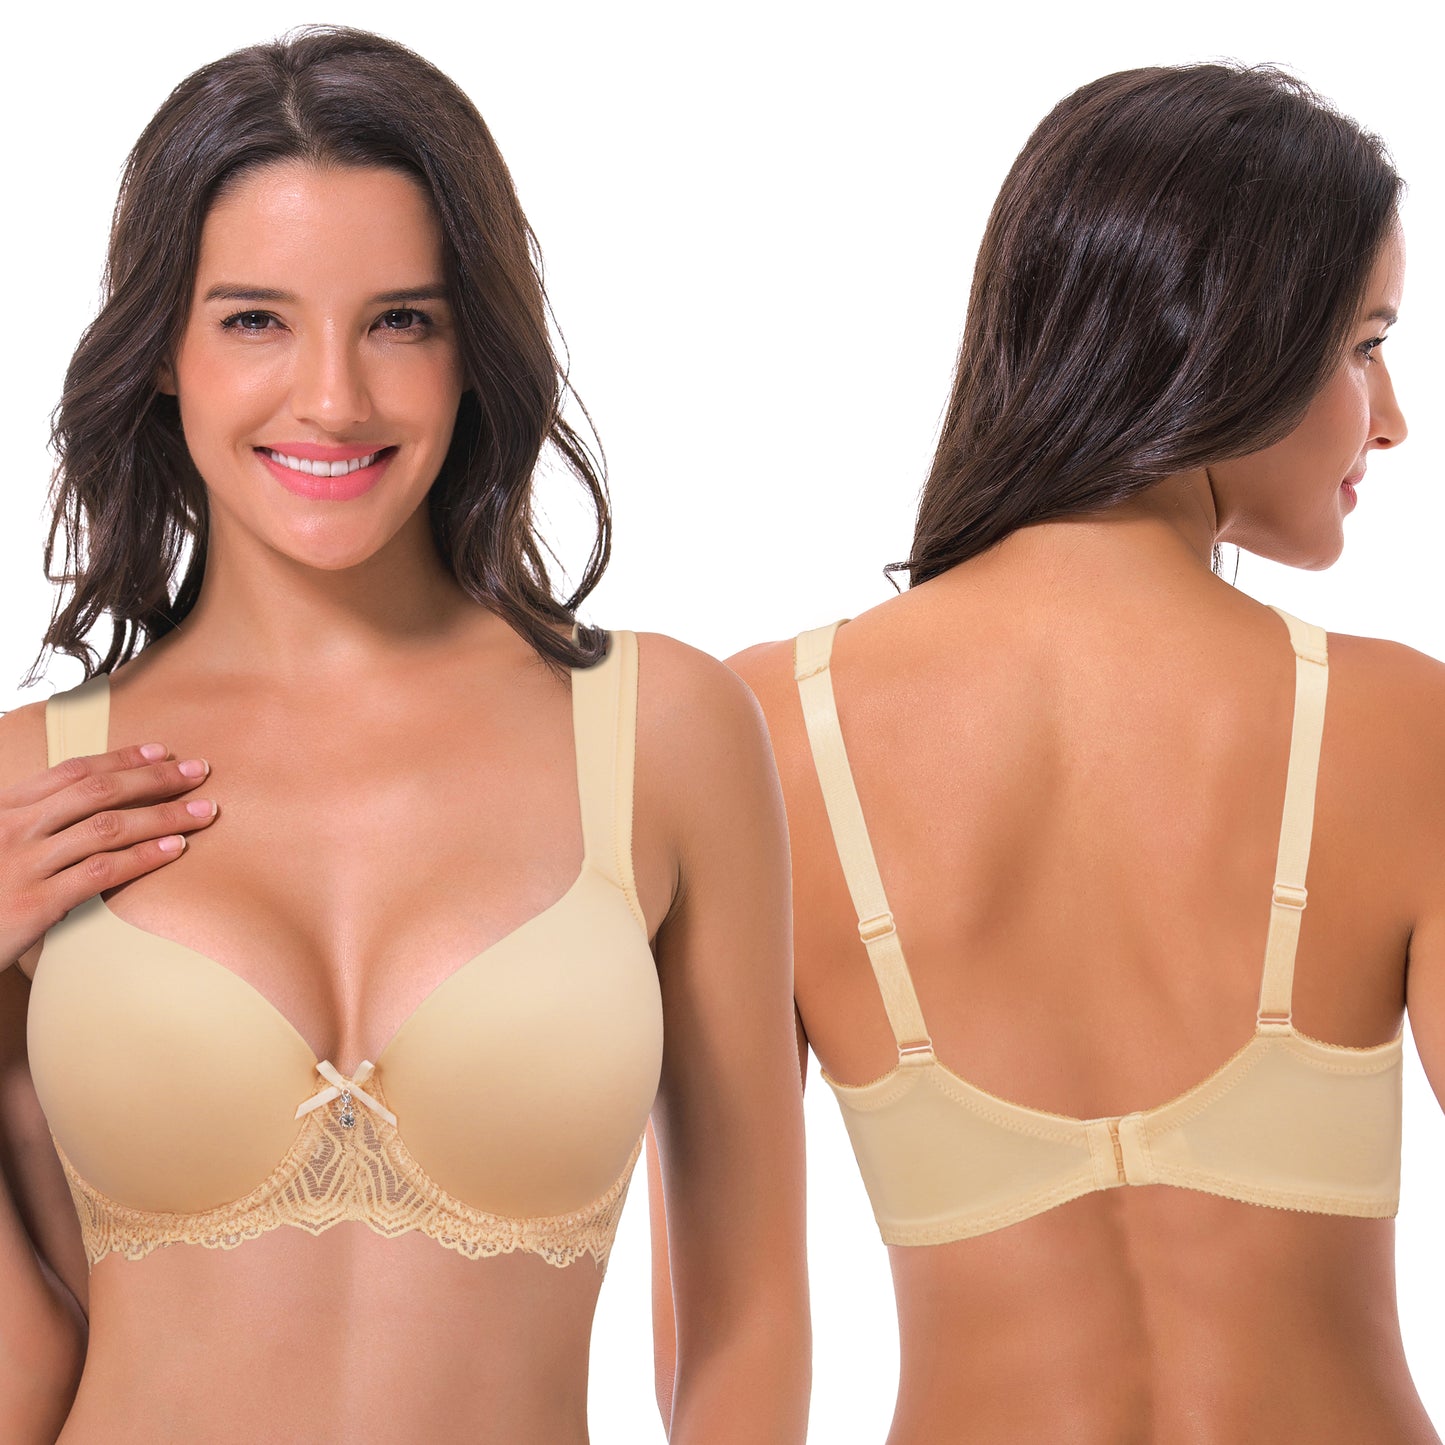 Women's Lightly Padded Underwire Lace Bra with Padded Shoulder Straps-2PK-LIGHT PURPLE,NUDE